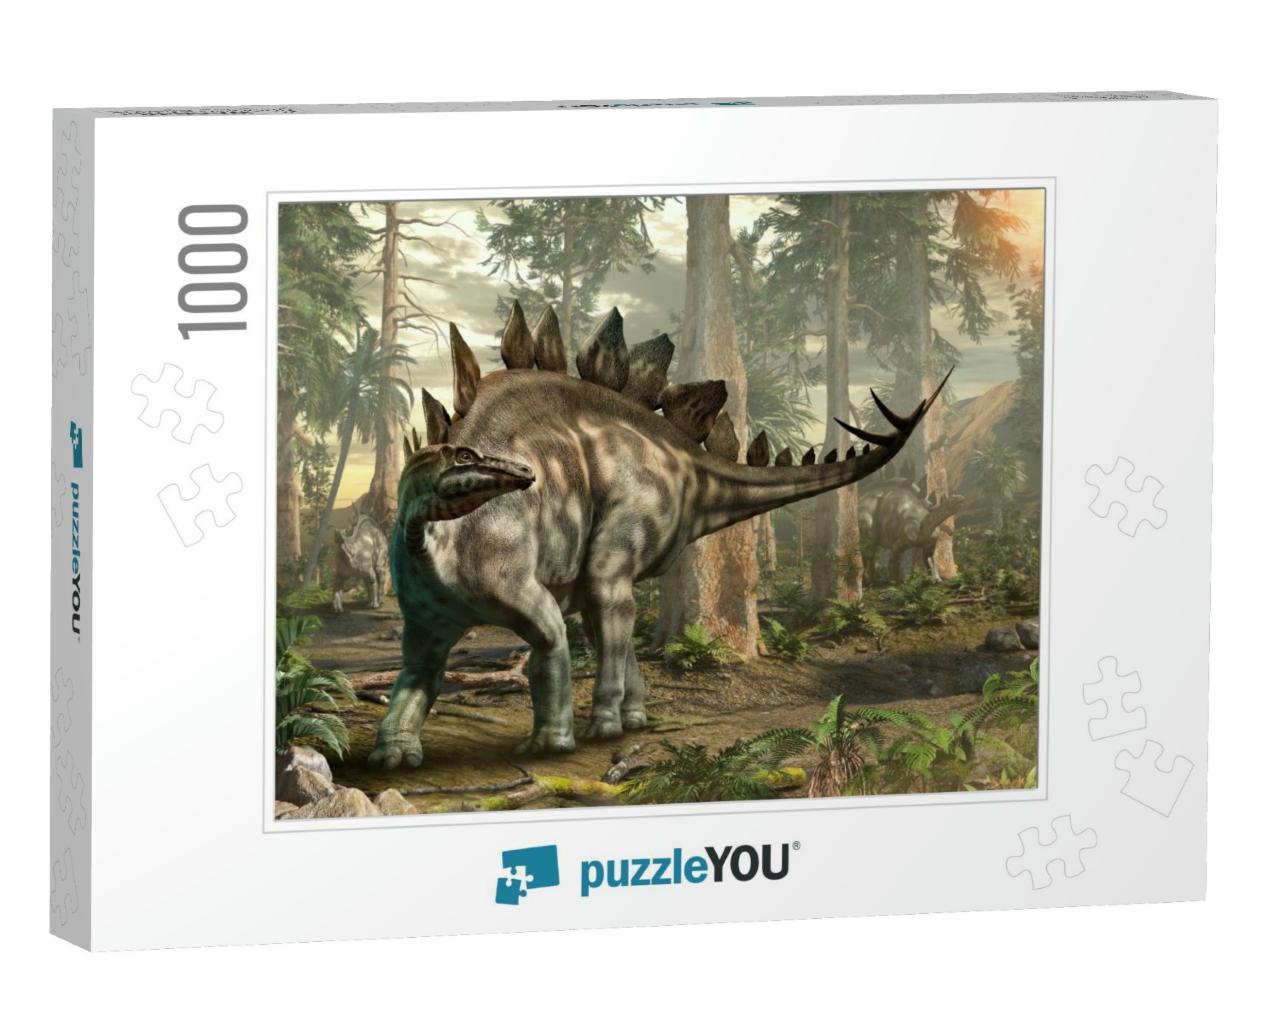 Stegosaurus Forest Scene 3D Illustration... Jigsaw Puzzle with 1000 pieces